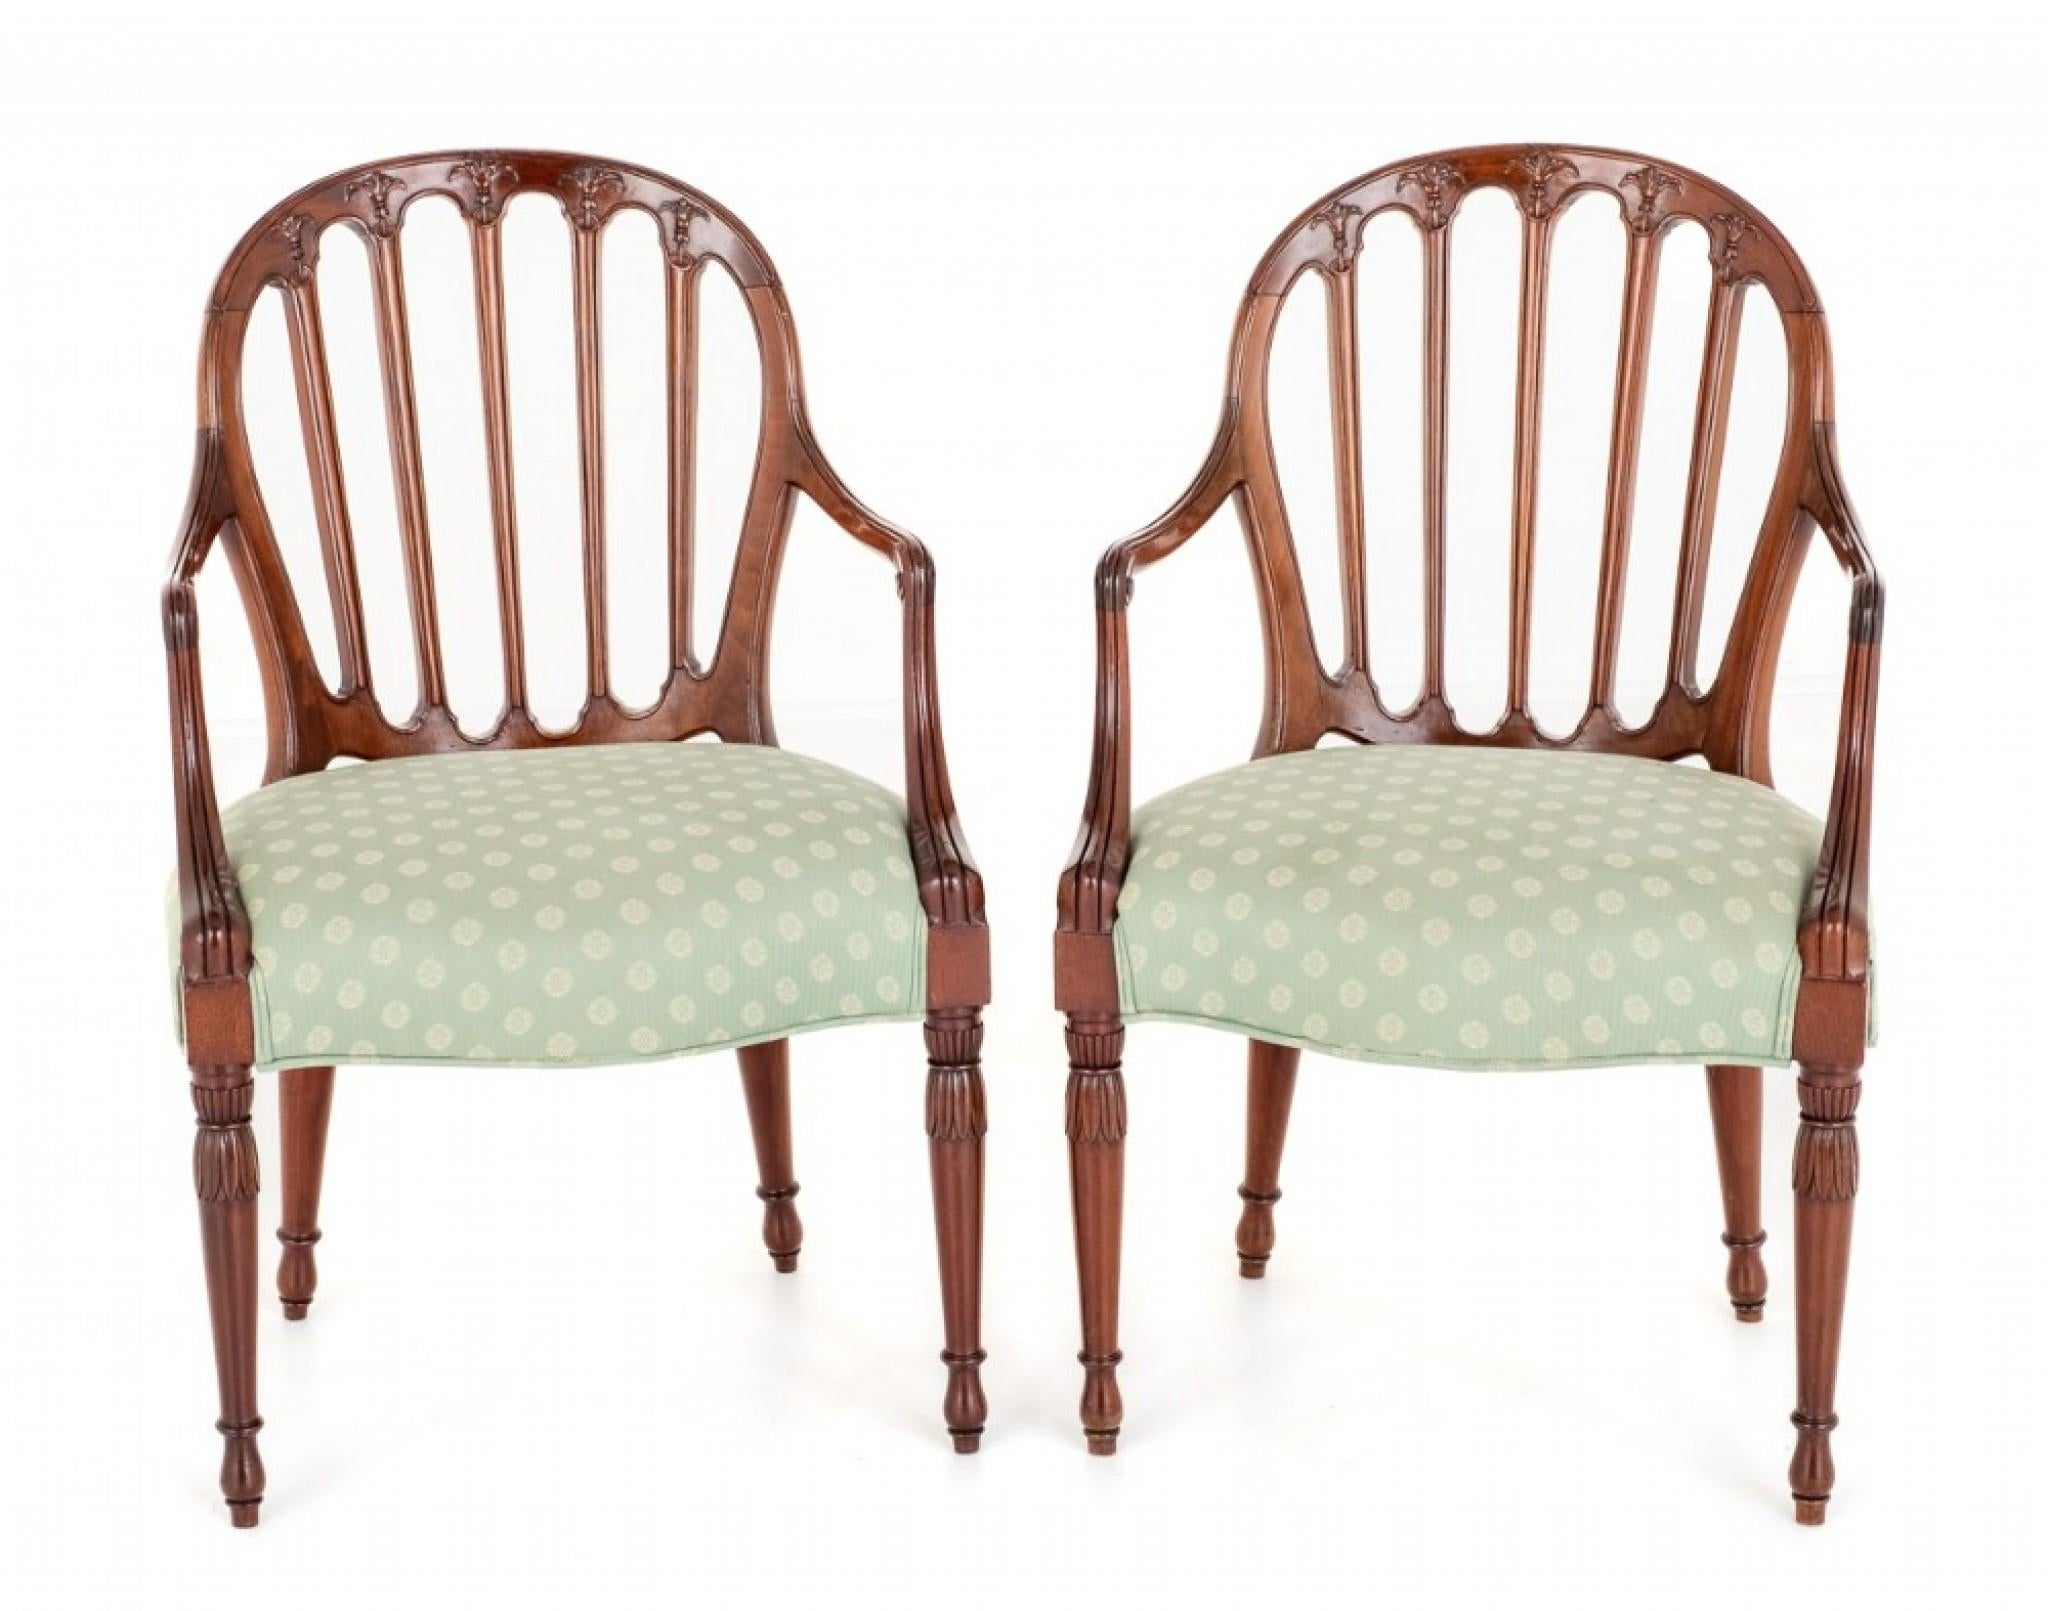 Pair Hepplewhite Arm Chairs Mahogany, 1900 In Good Condition For Sale In Potters Bar, GB